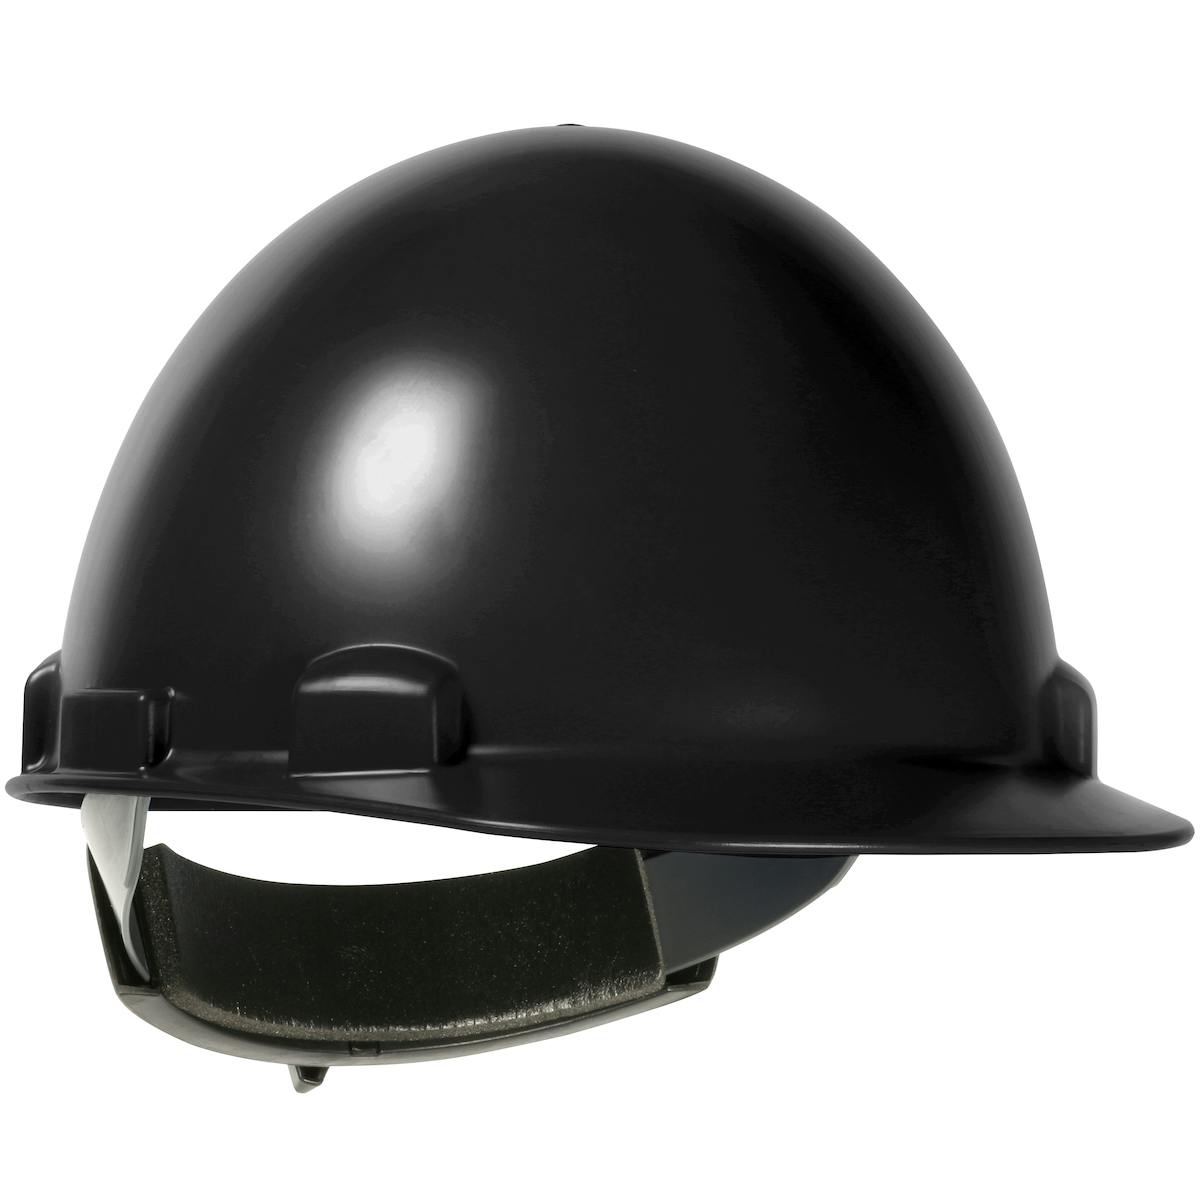 Stromboli™ Cap Style Smooth Dome Hard Hat with ABS/Polycarbonate Shell, 4-Point Textile Suspension and Wheel-Ratchet Adjustment (280-HP841R)_0